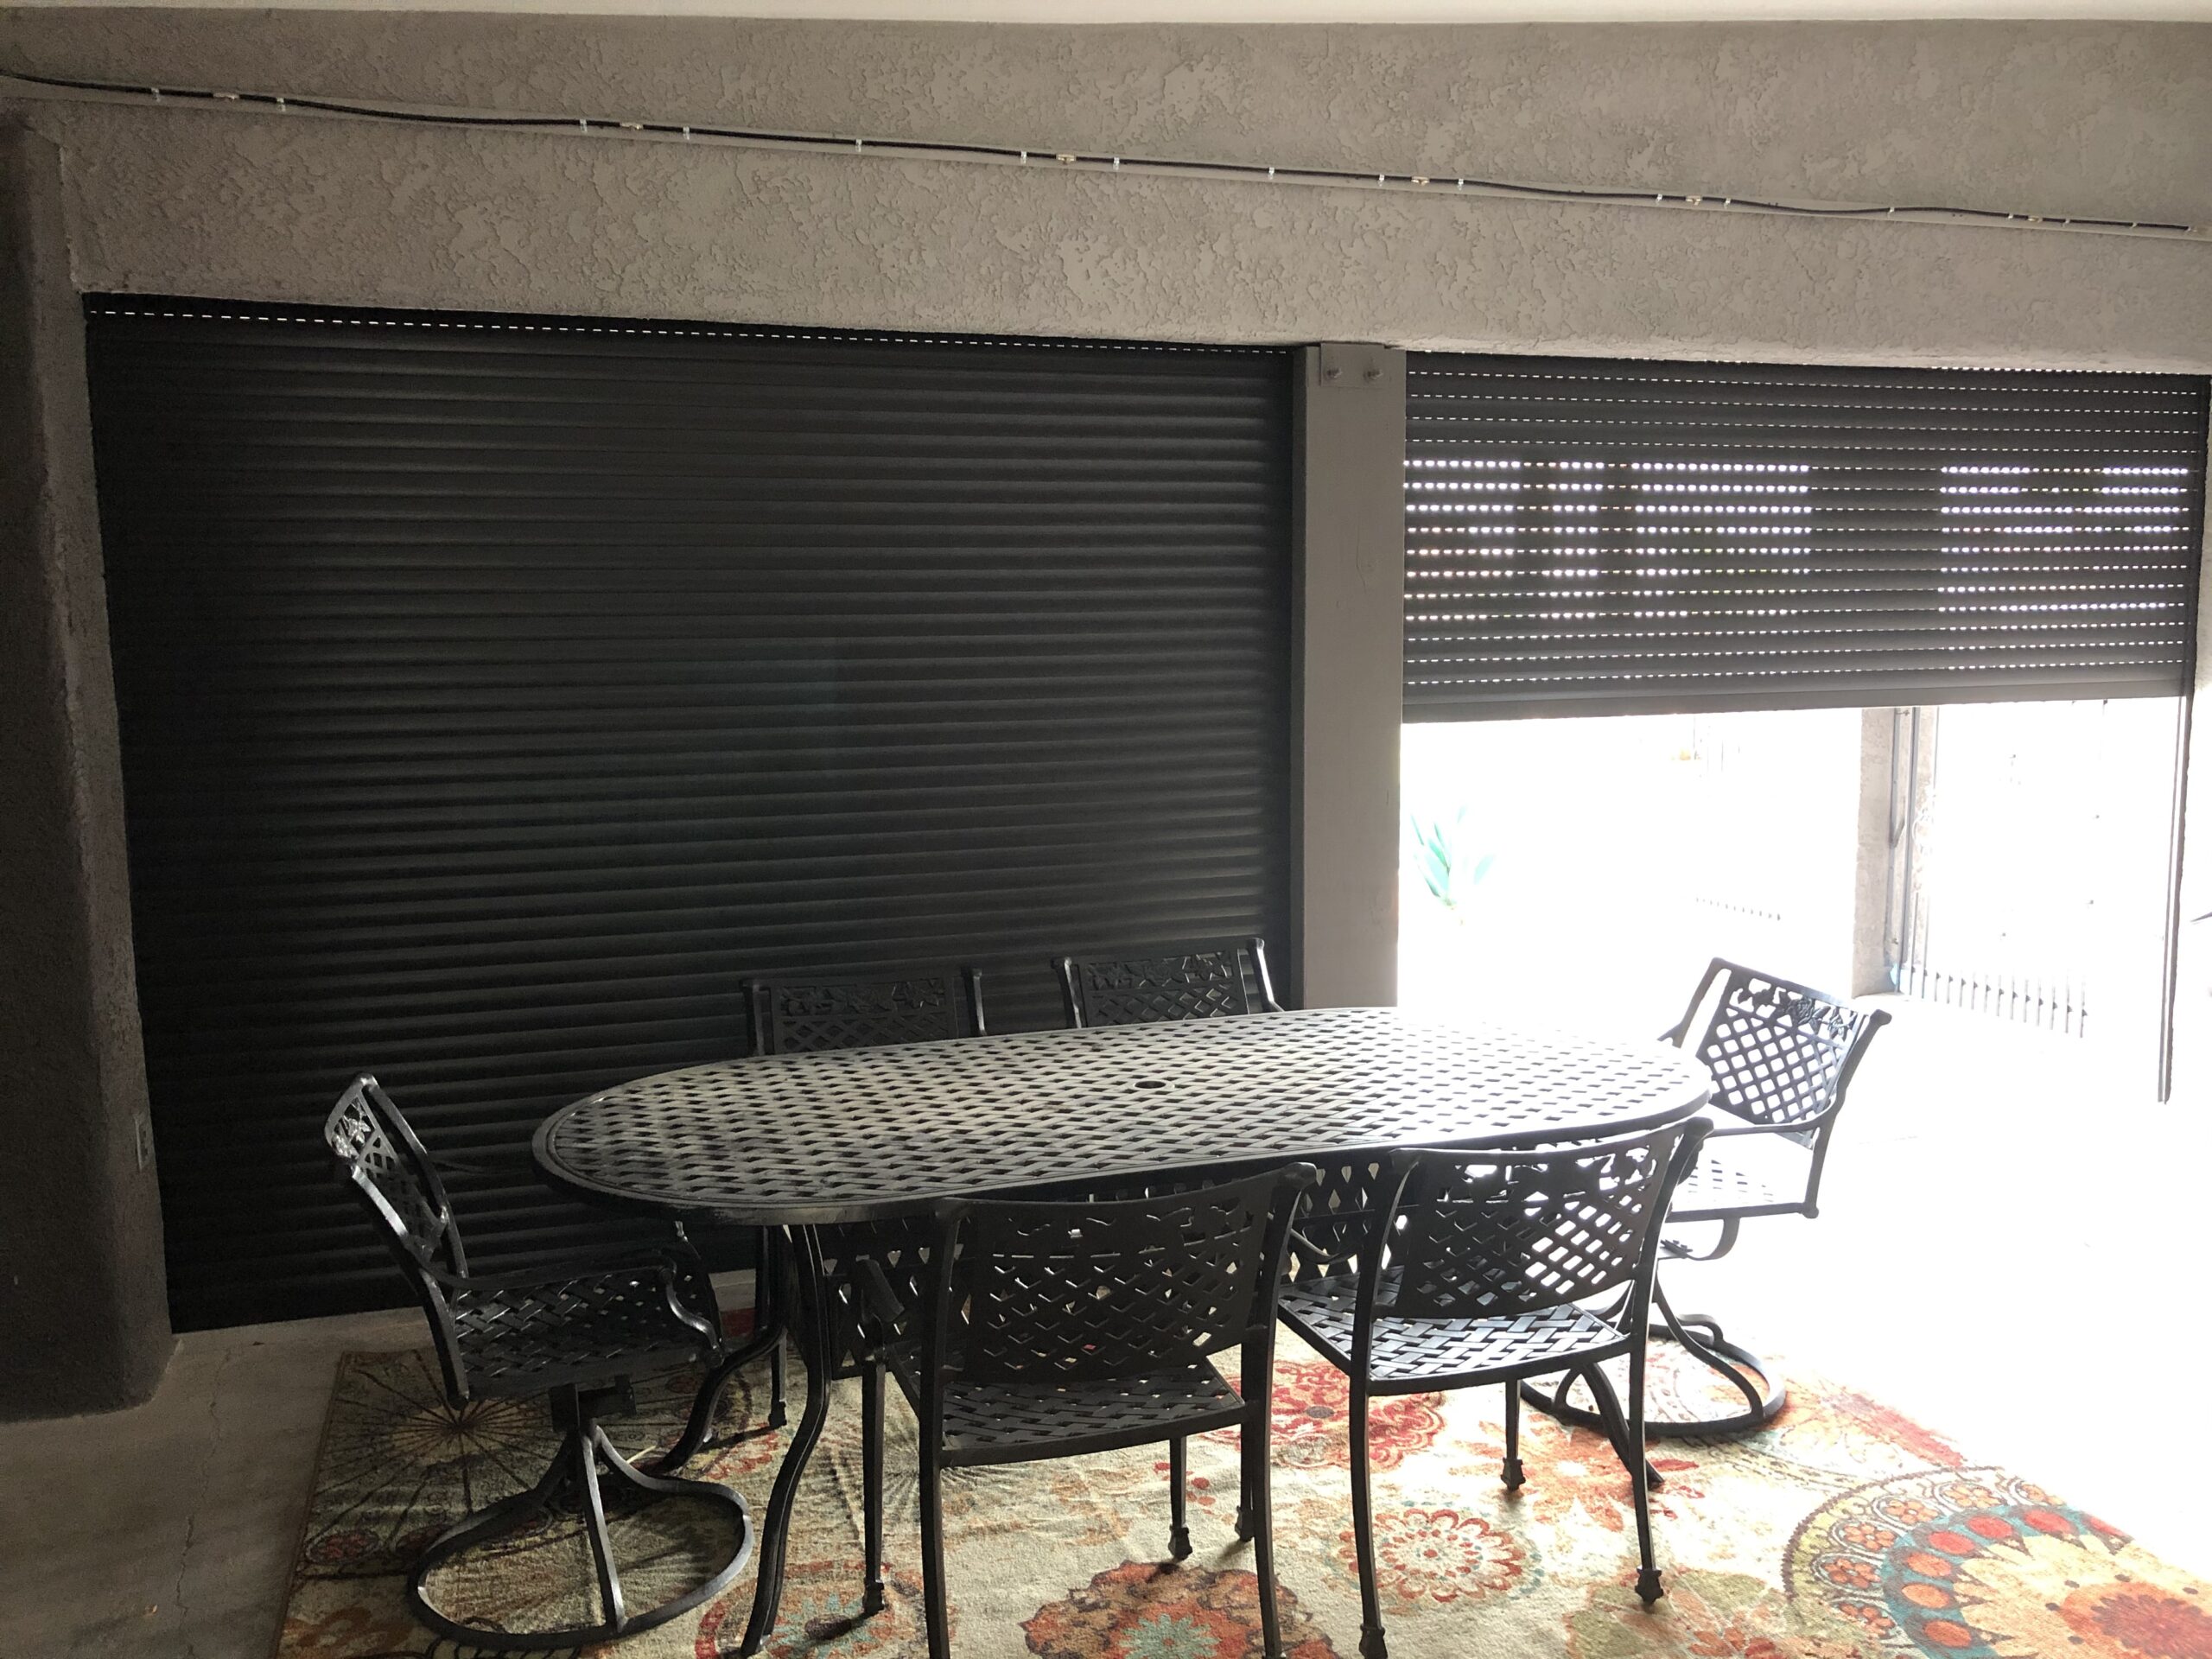 Top 4 Benefits of Installing Security Shutters